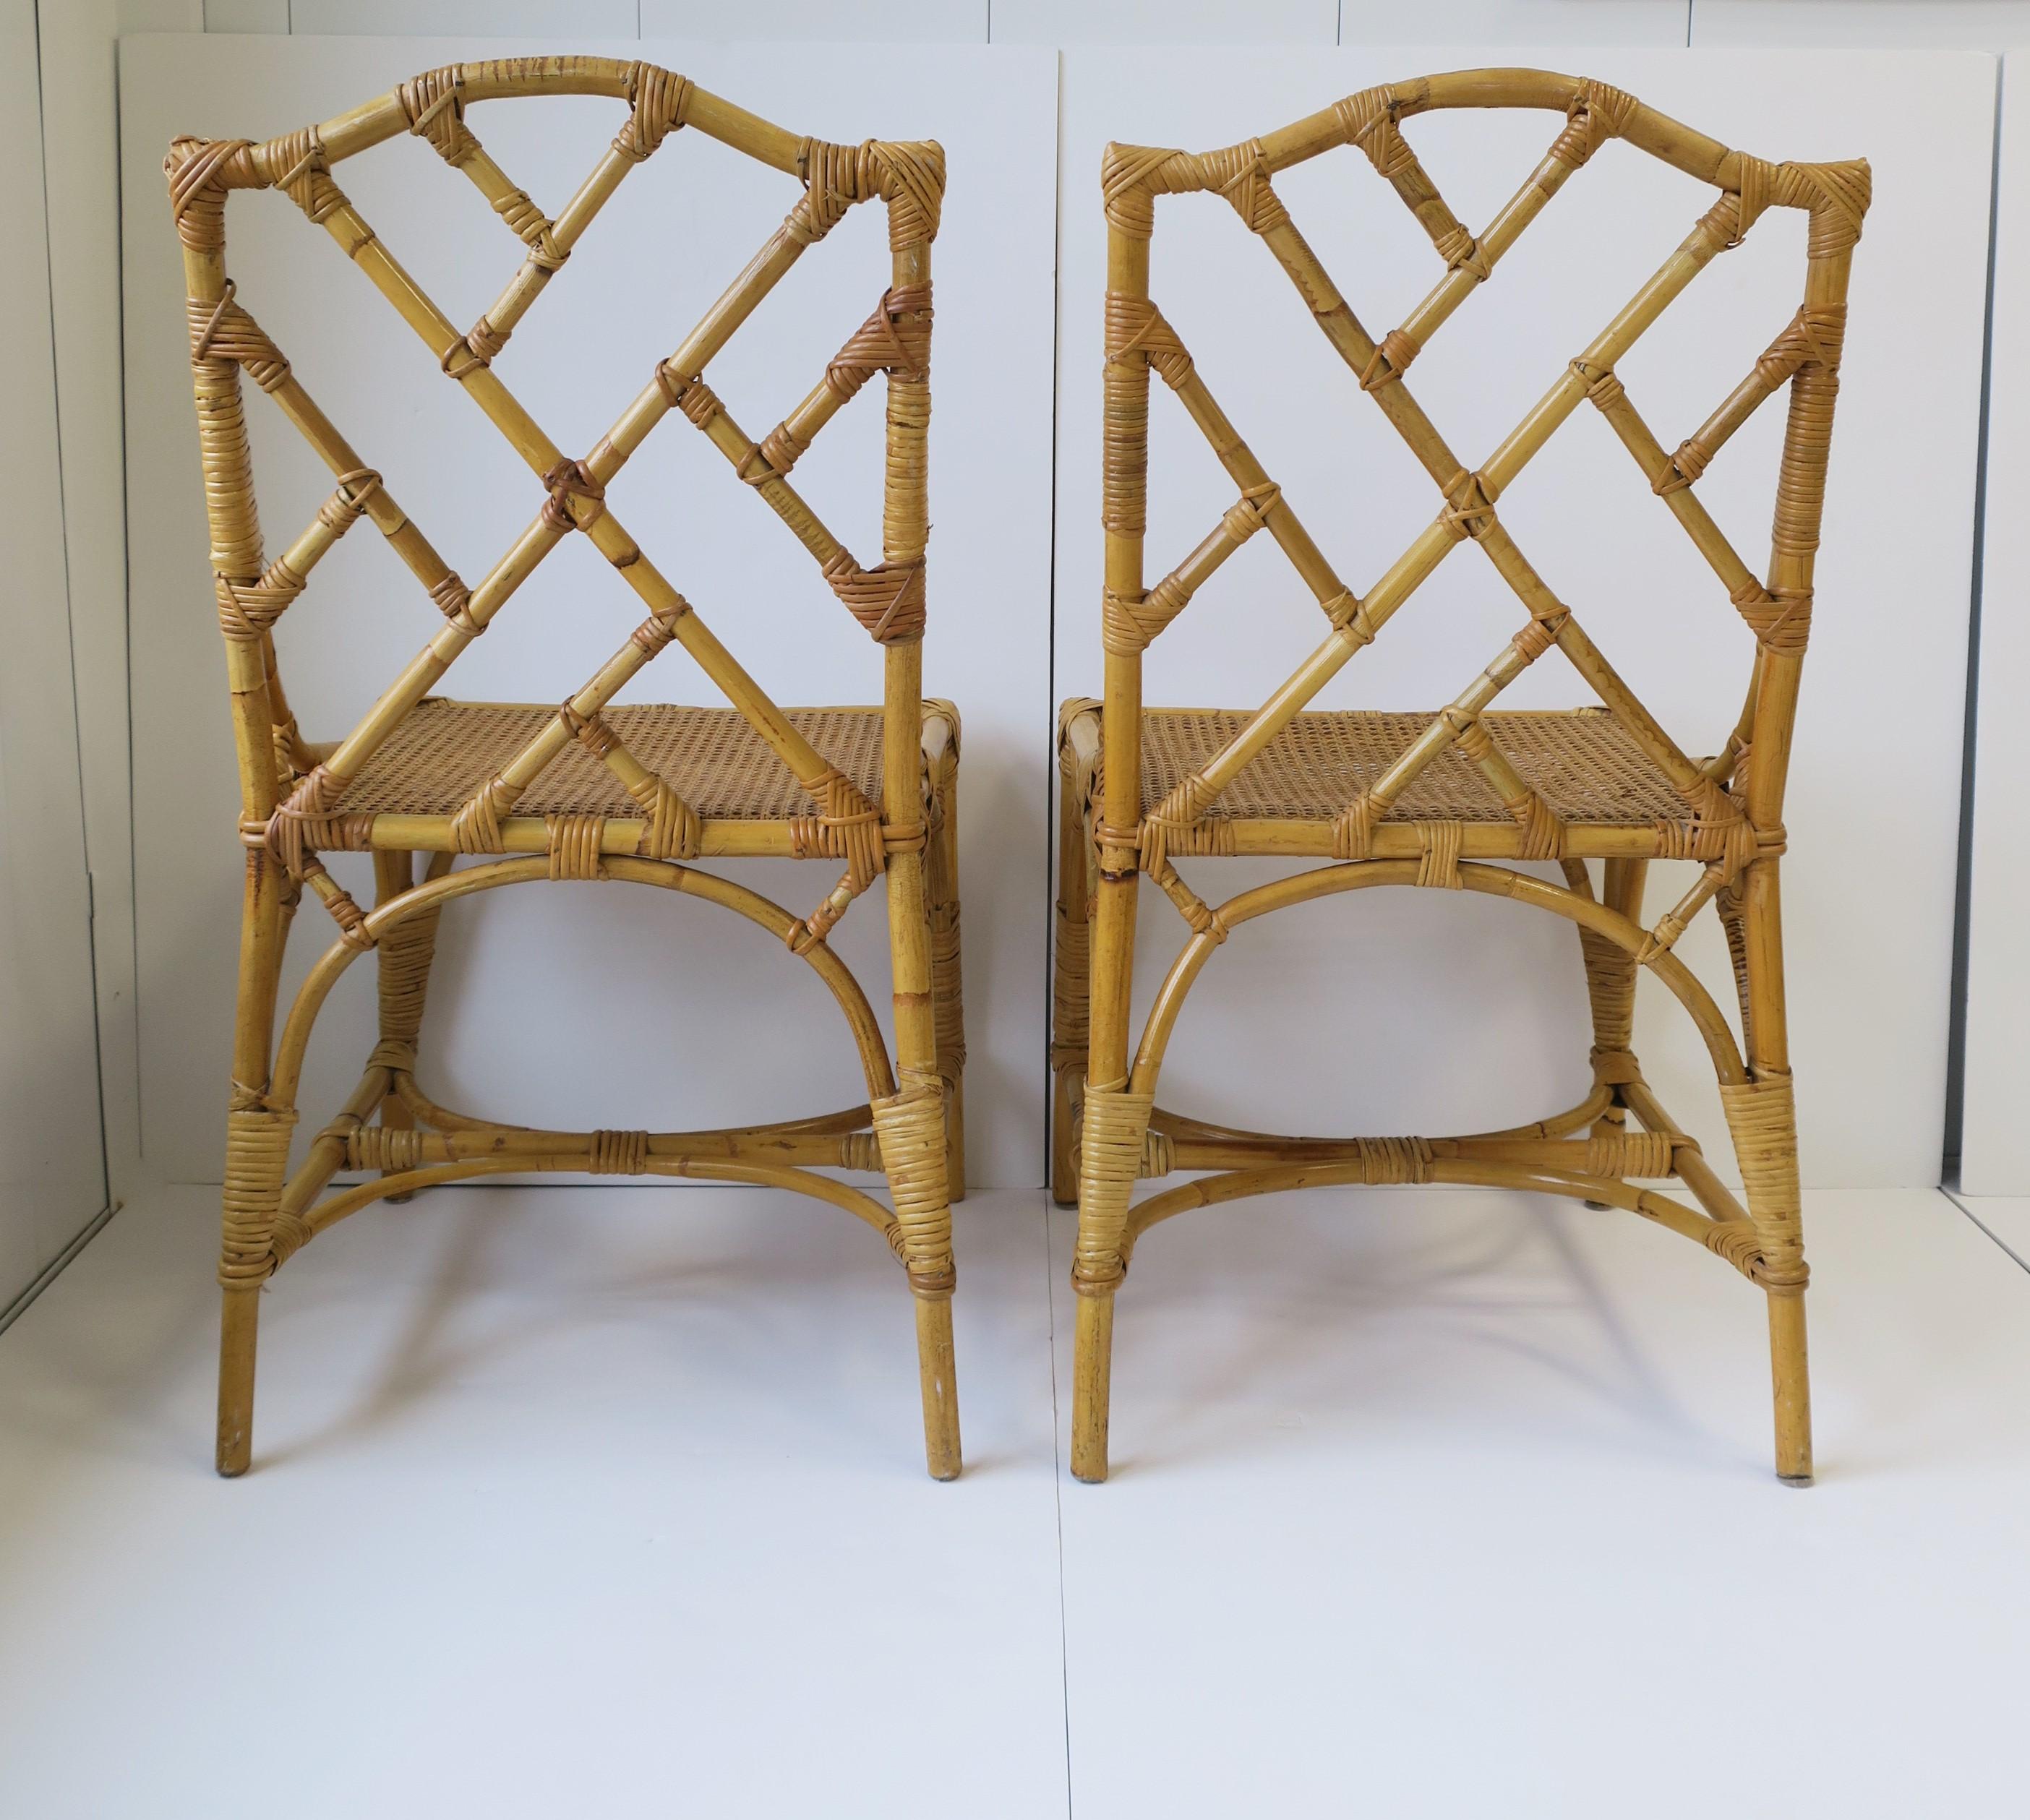 Designer Italian Cane and Bamboo Wicker Rattan Side Chairs, Pair 4